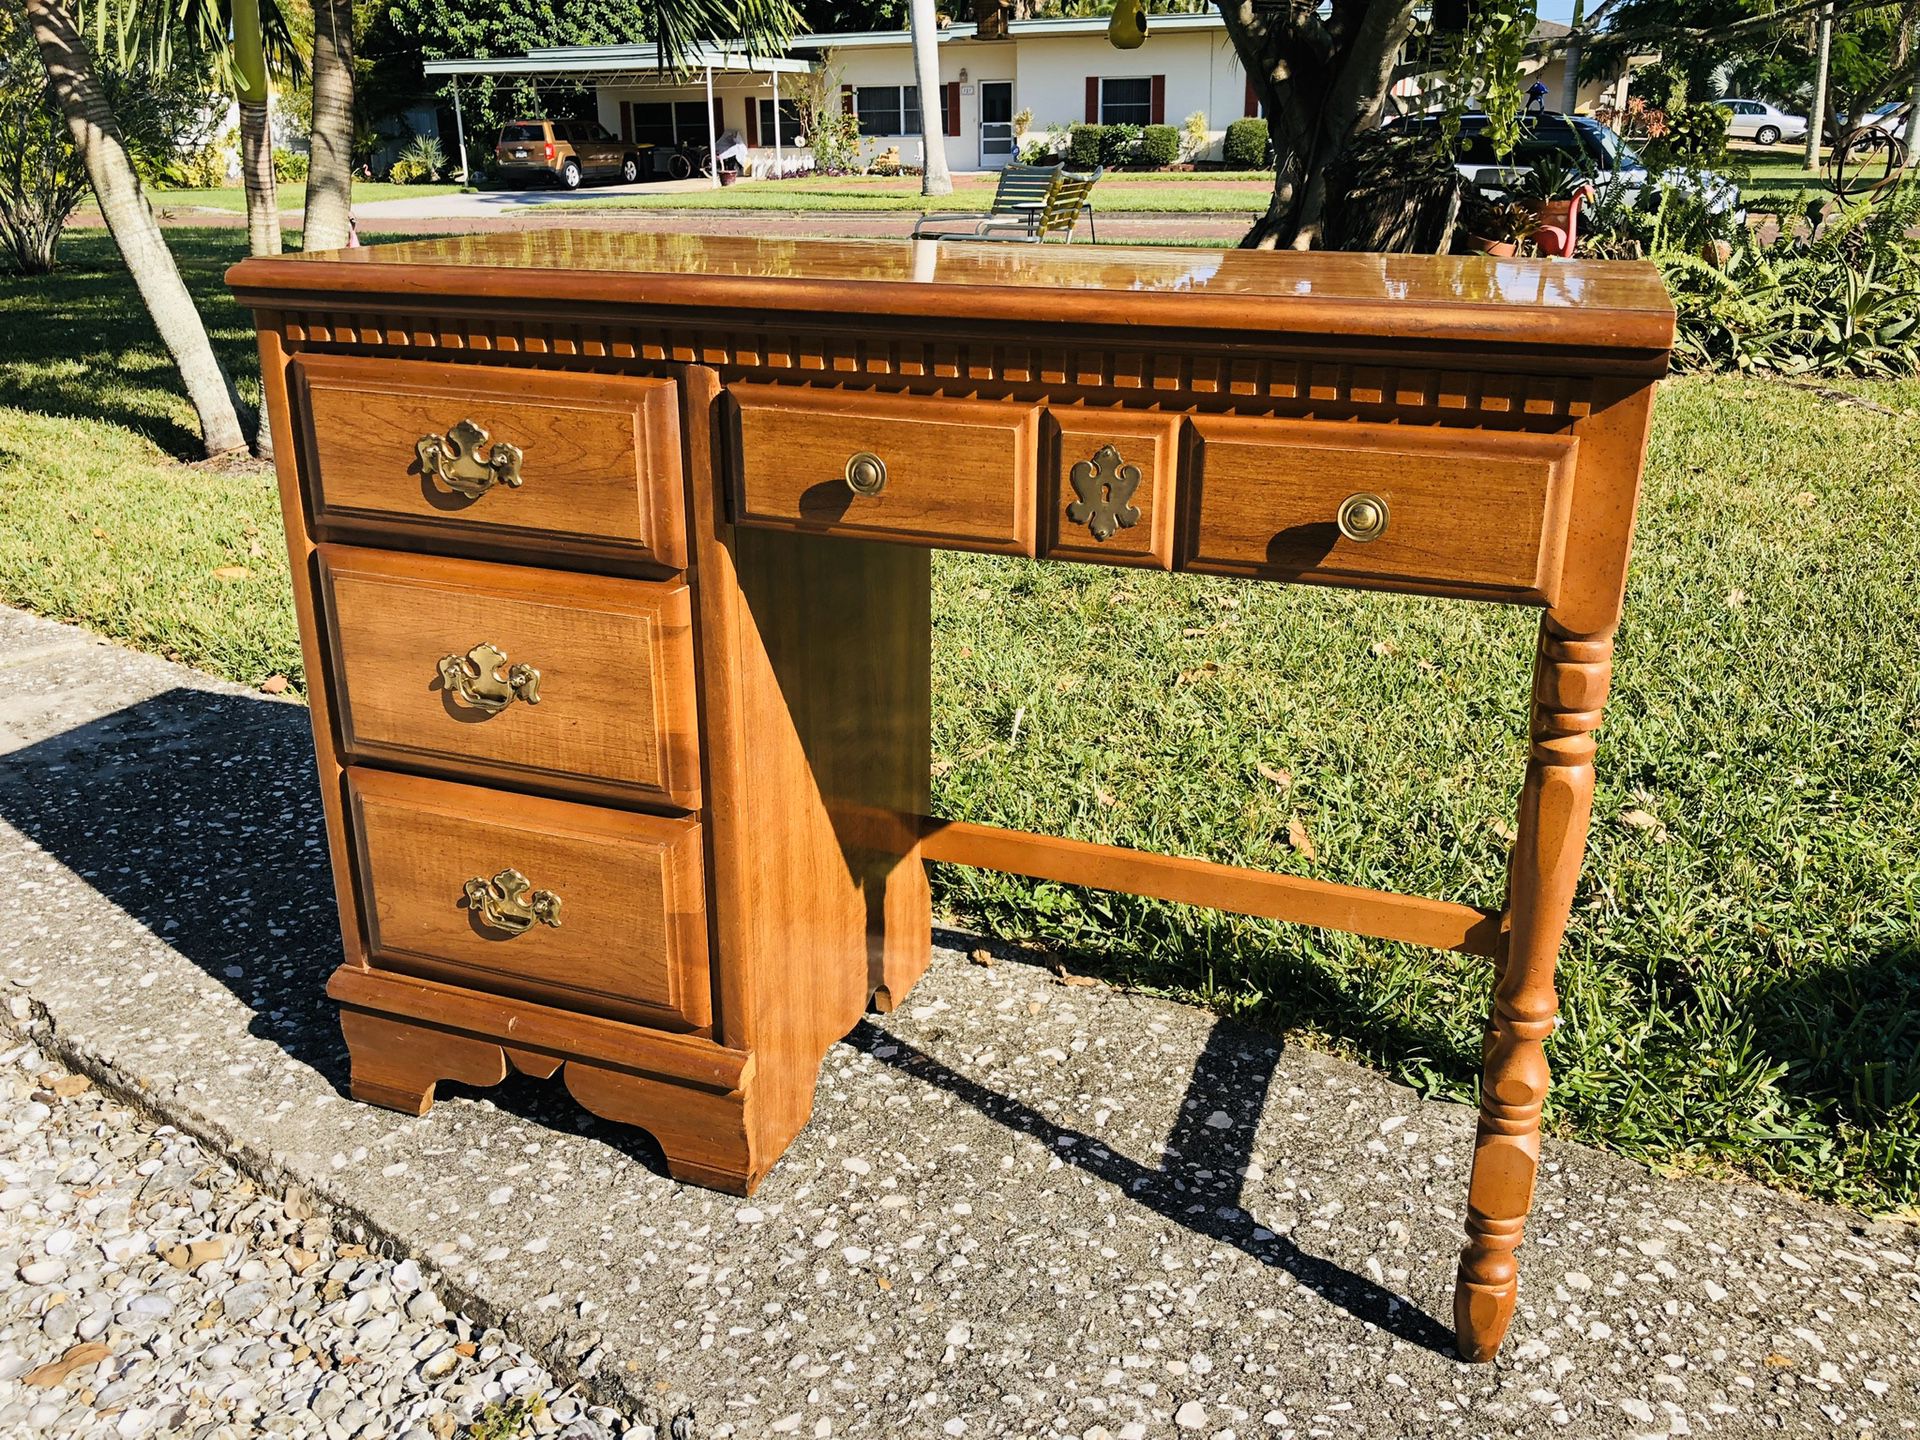 Early American Small (4) Drawer Desk.